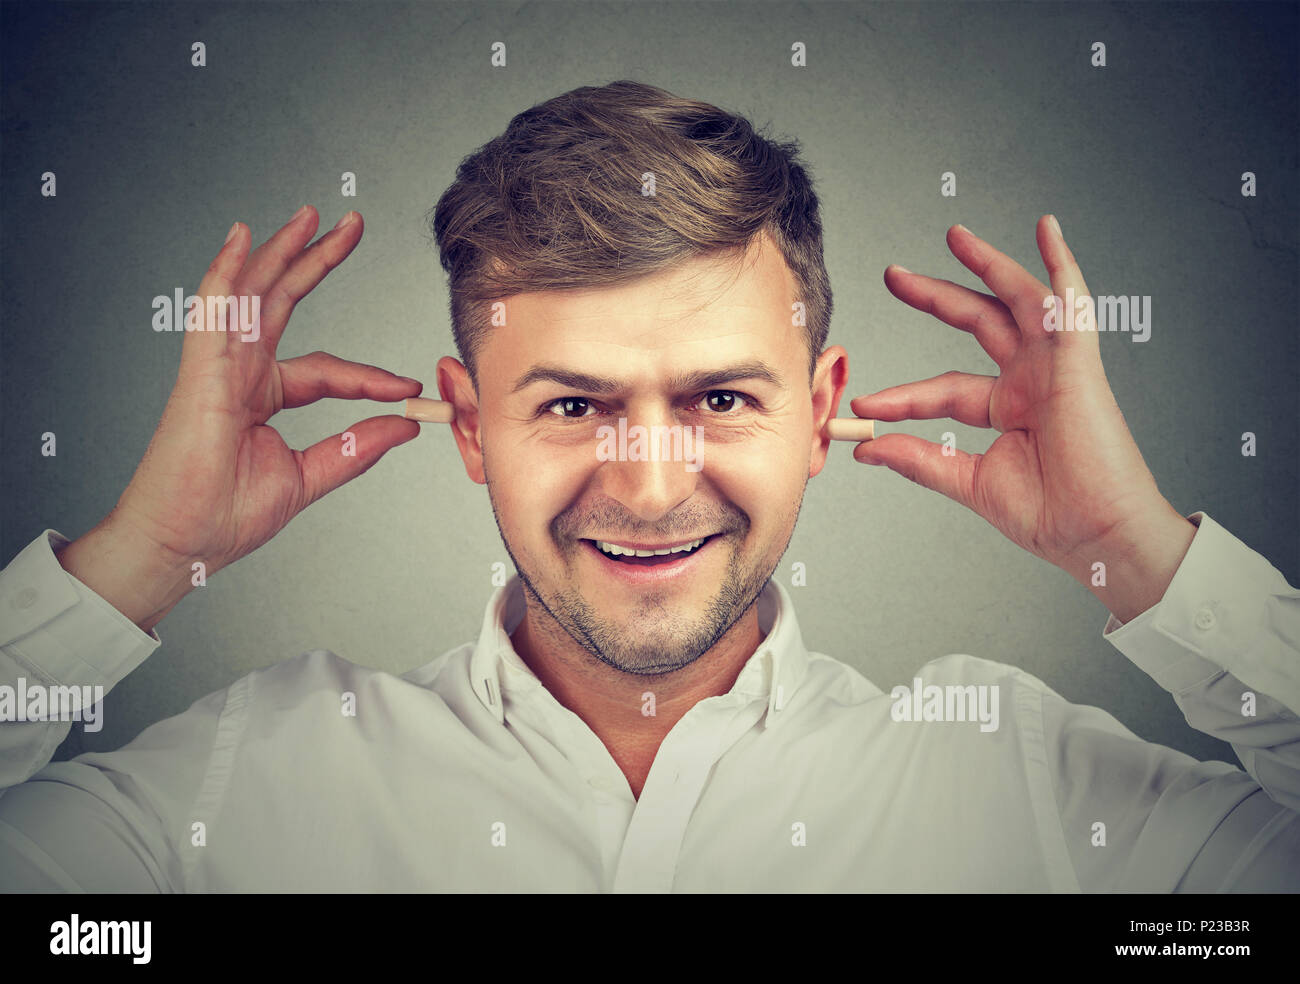 Content man inserting ear plugs happy with solution of loud neighbours problem looking at camera. Stock Photo